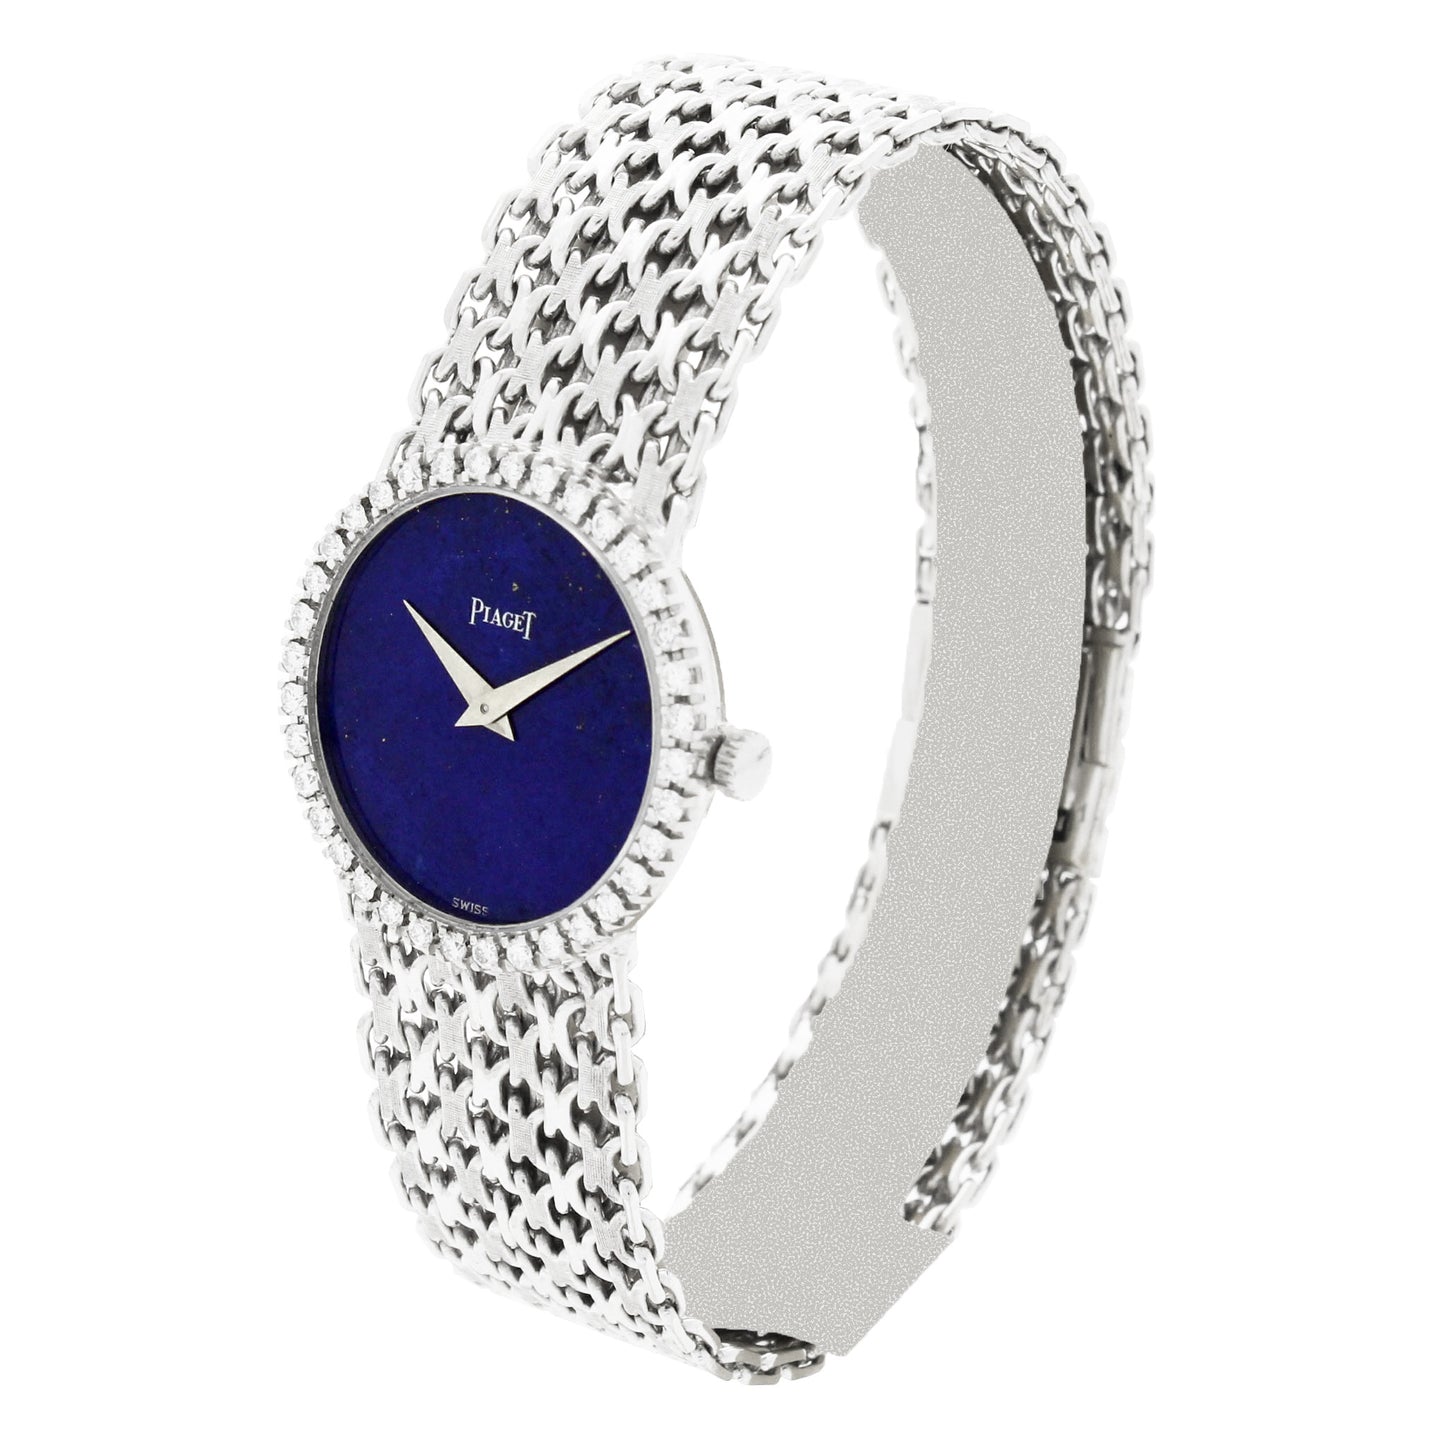 18ct white gold Piaget, 'round cased' bracelet watch with lapis lazuli dial and diamond set bezel. Made 1970's